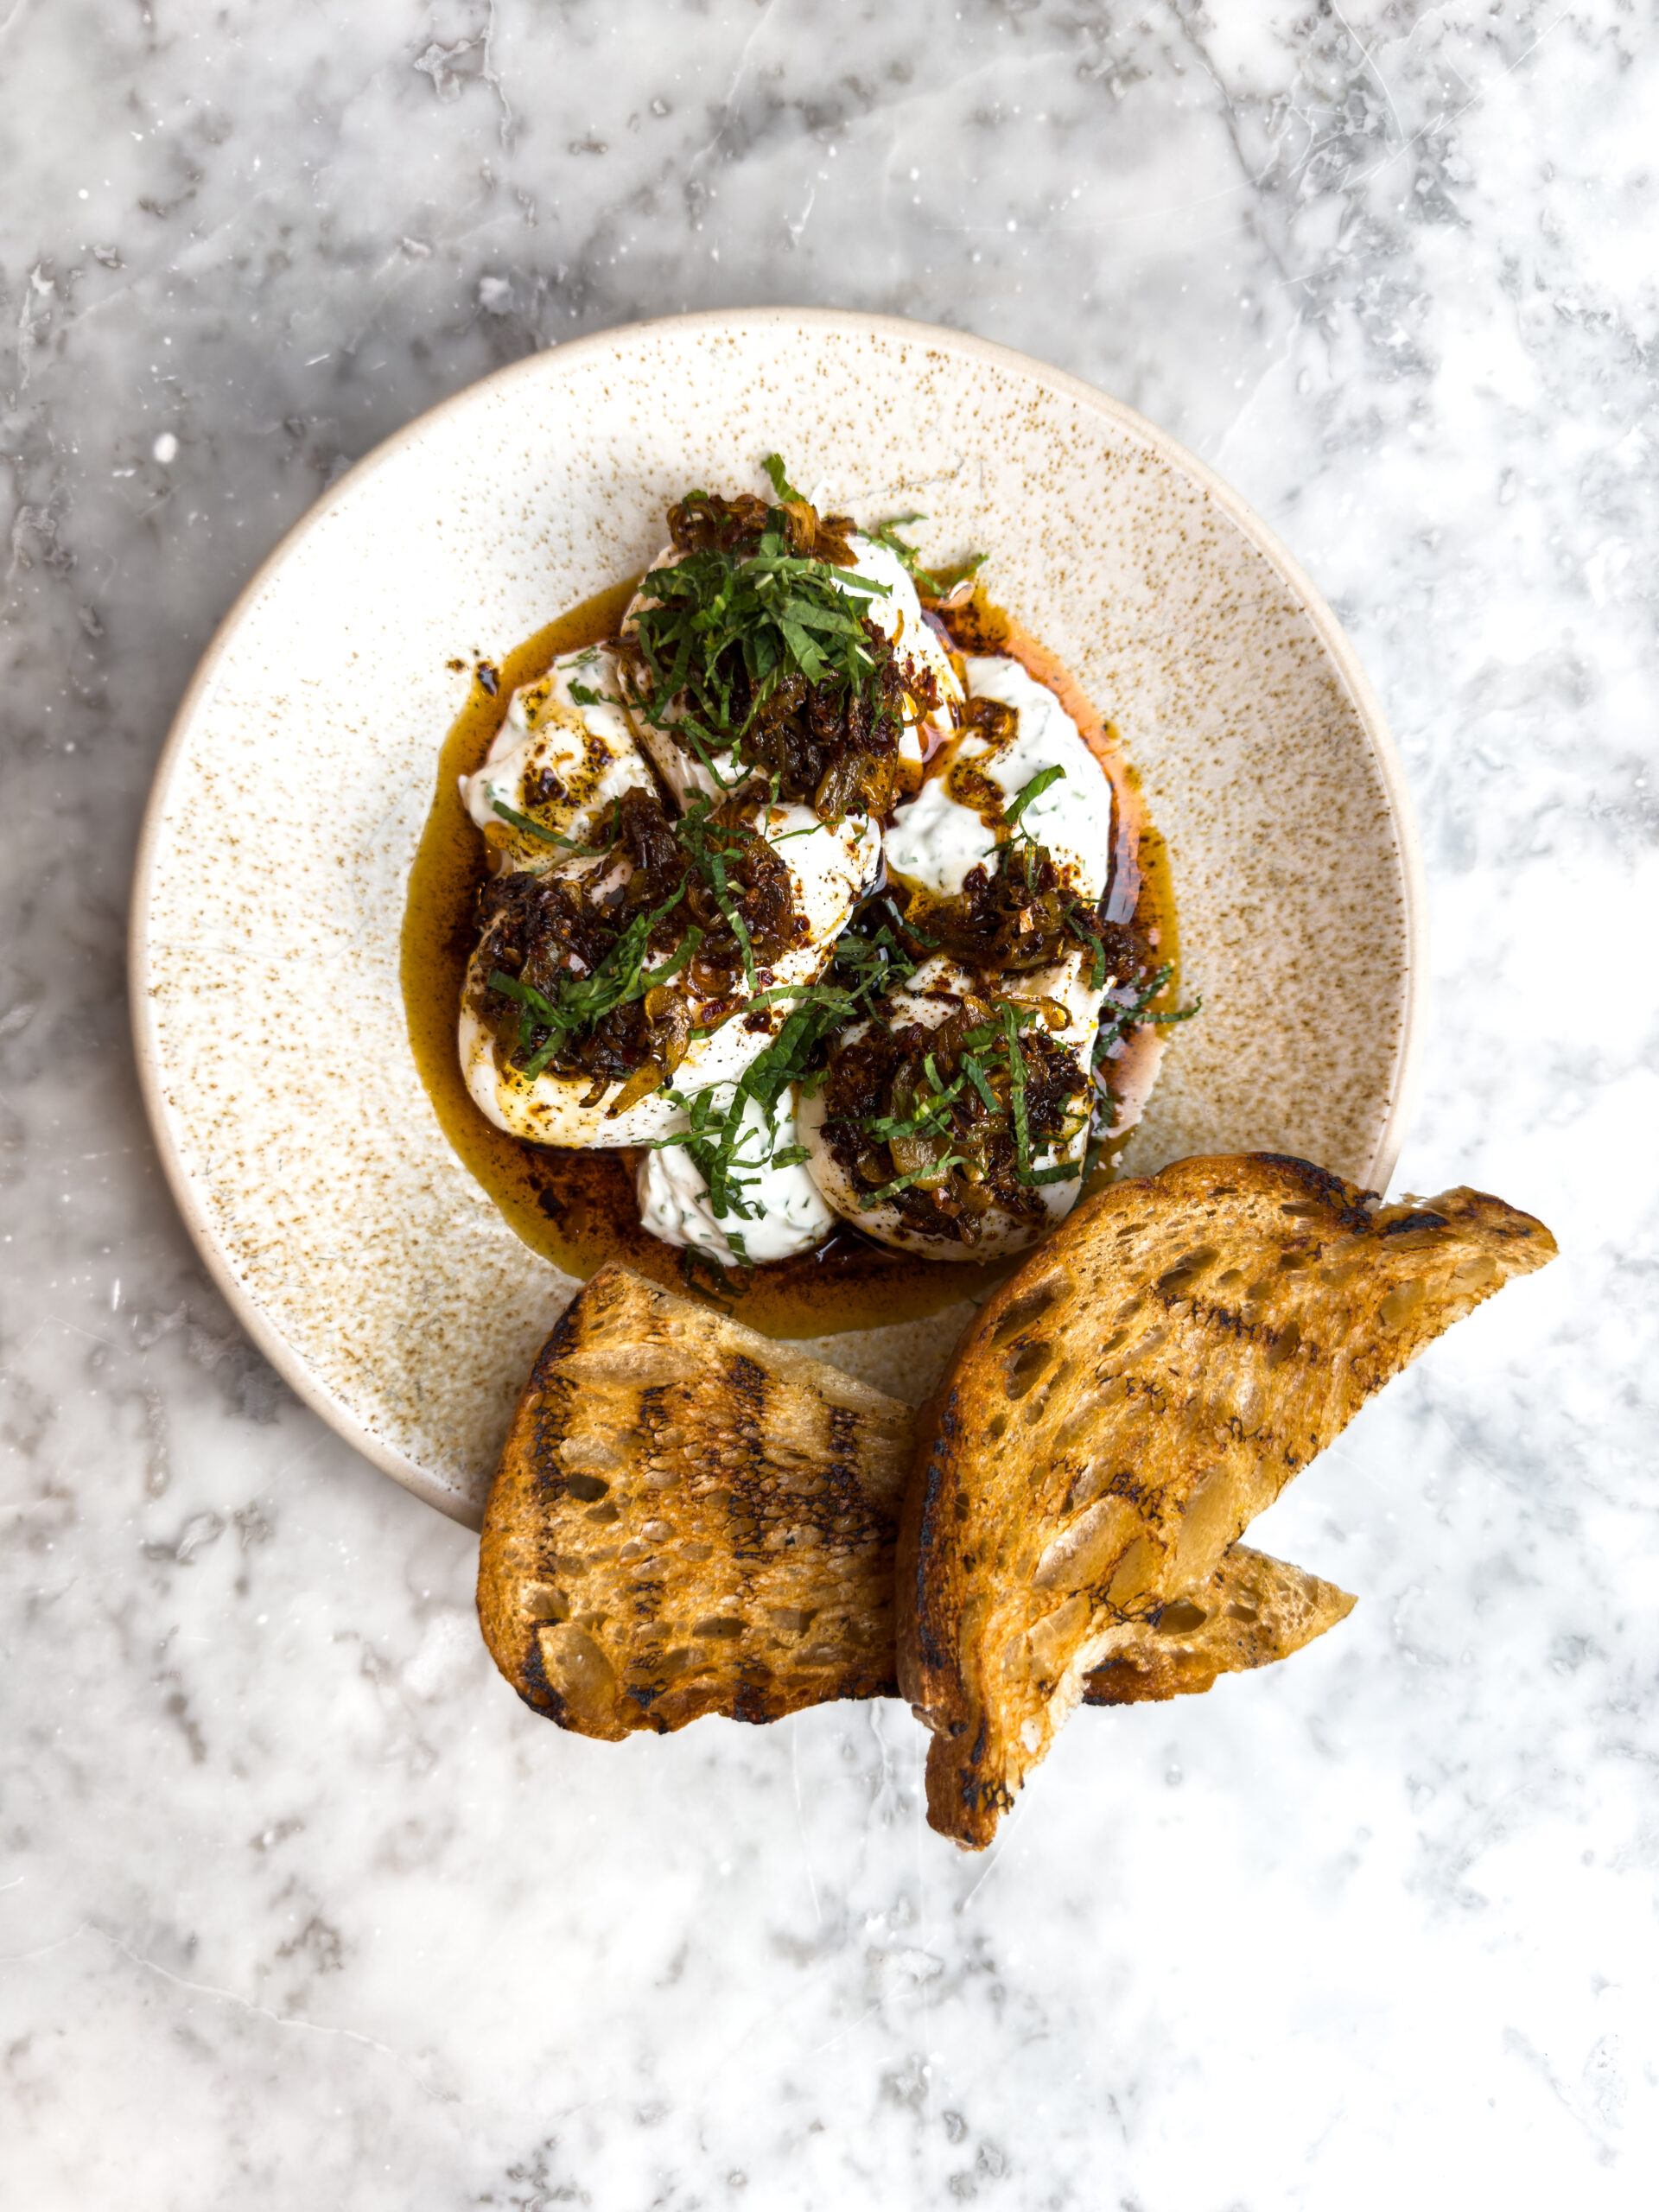 Overhead view of brown butter Turkish eggs in a beige speckled bowl with grilled sourdough toast, all on a marble background